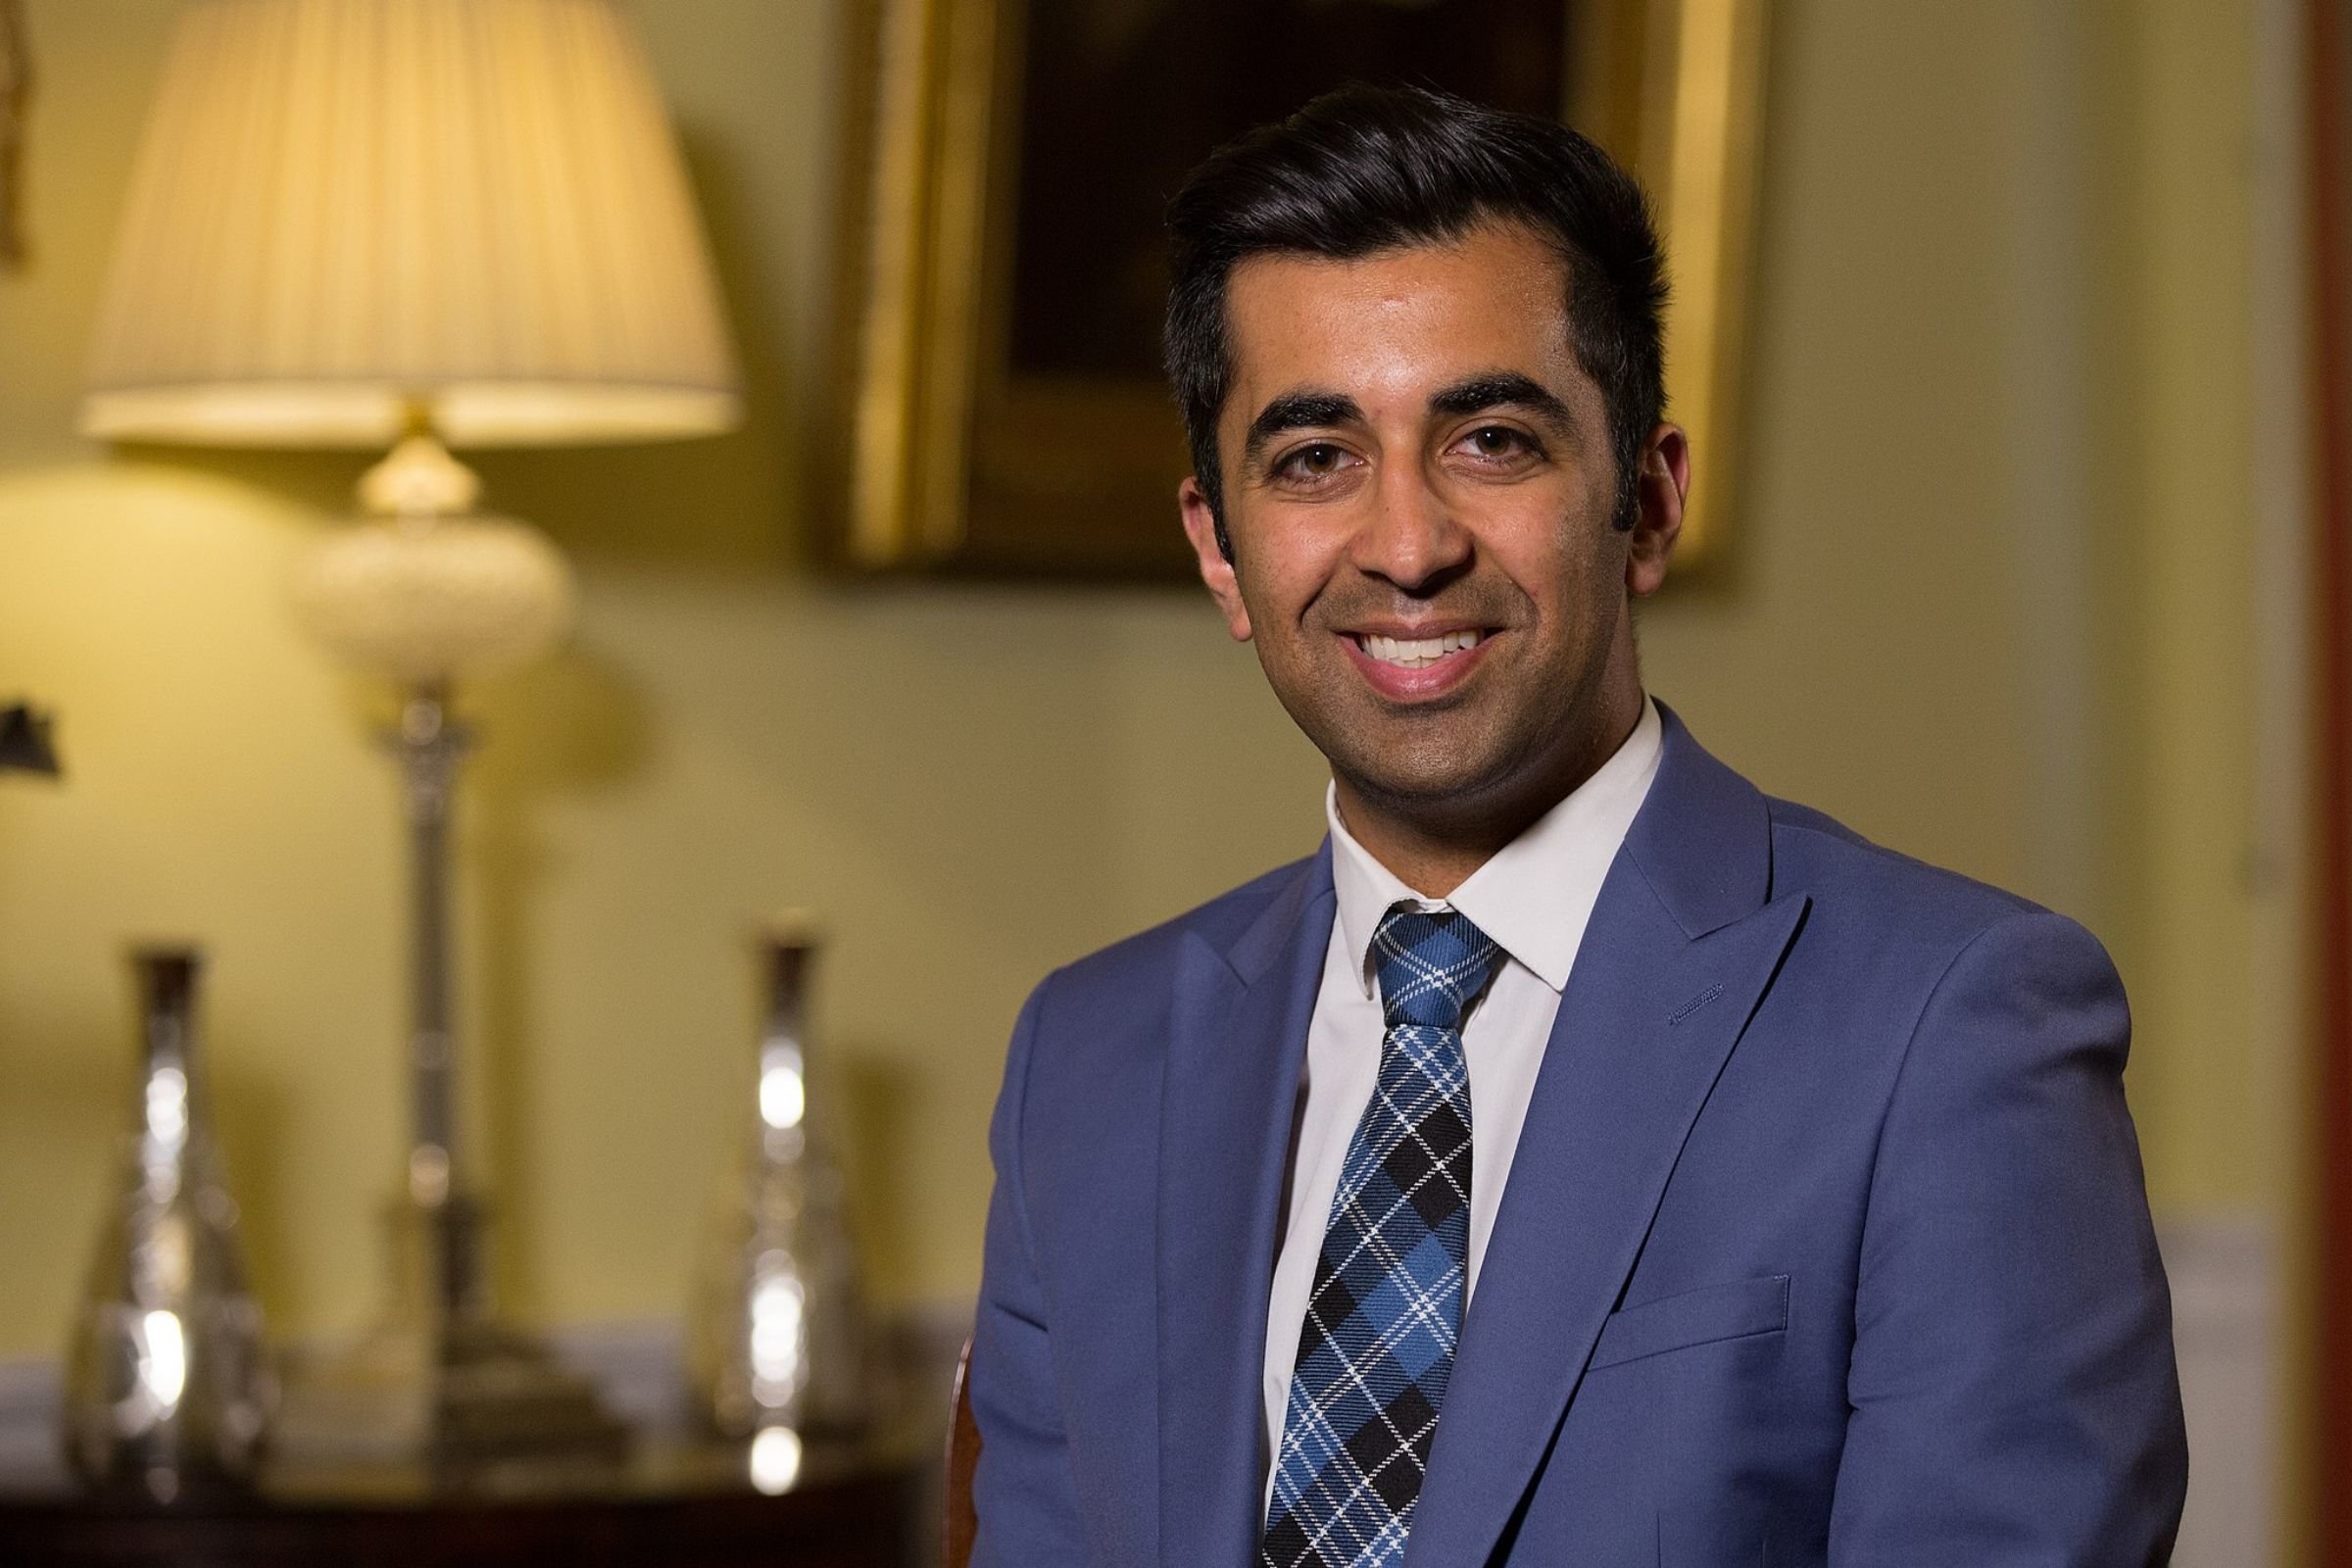 Humza Yousaf and the new face of Islam in public life 